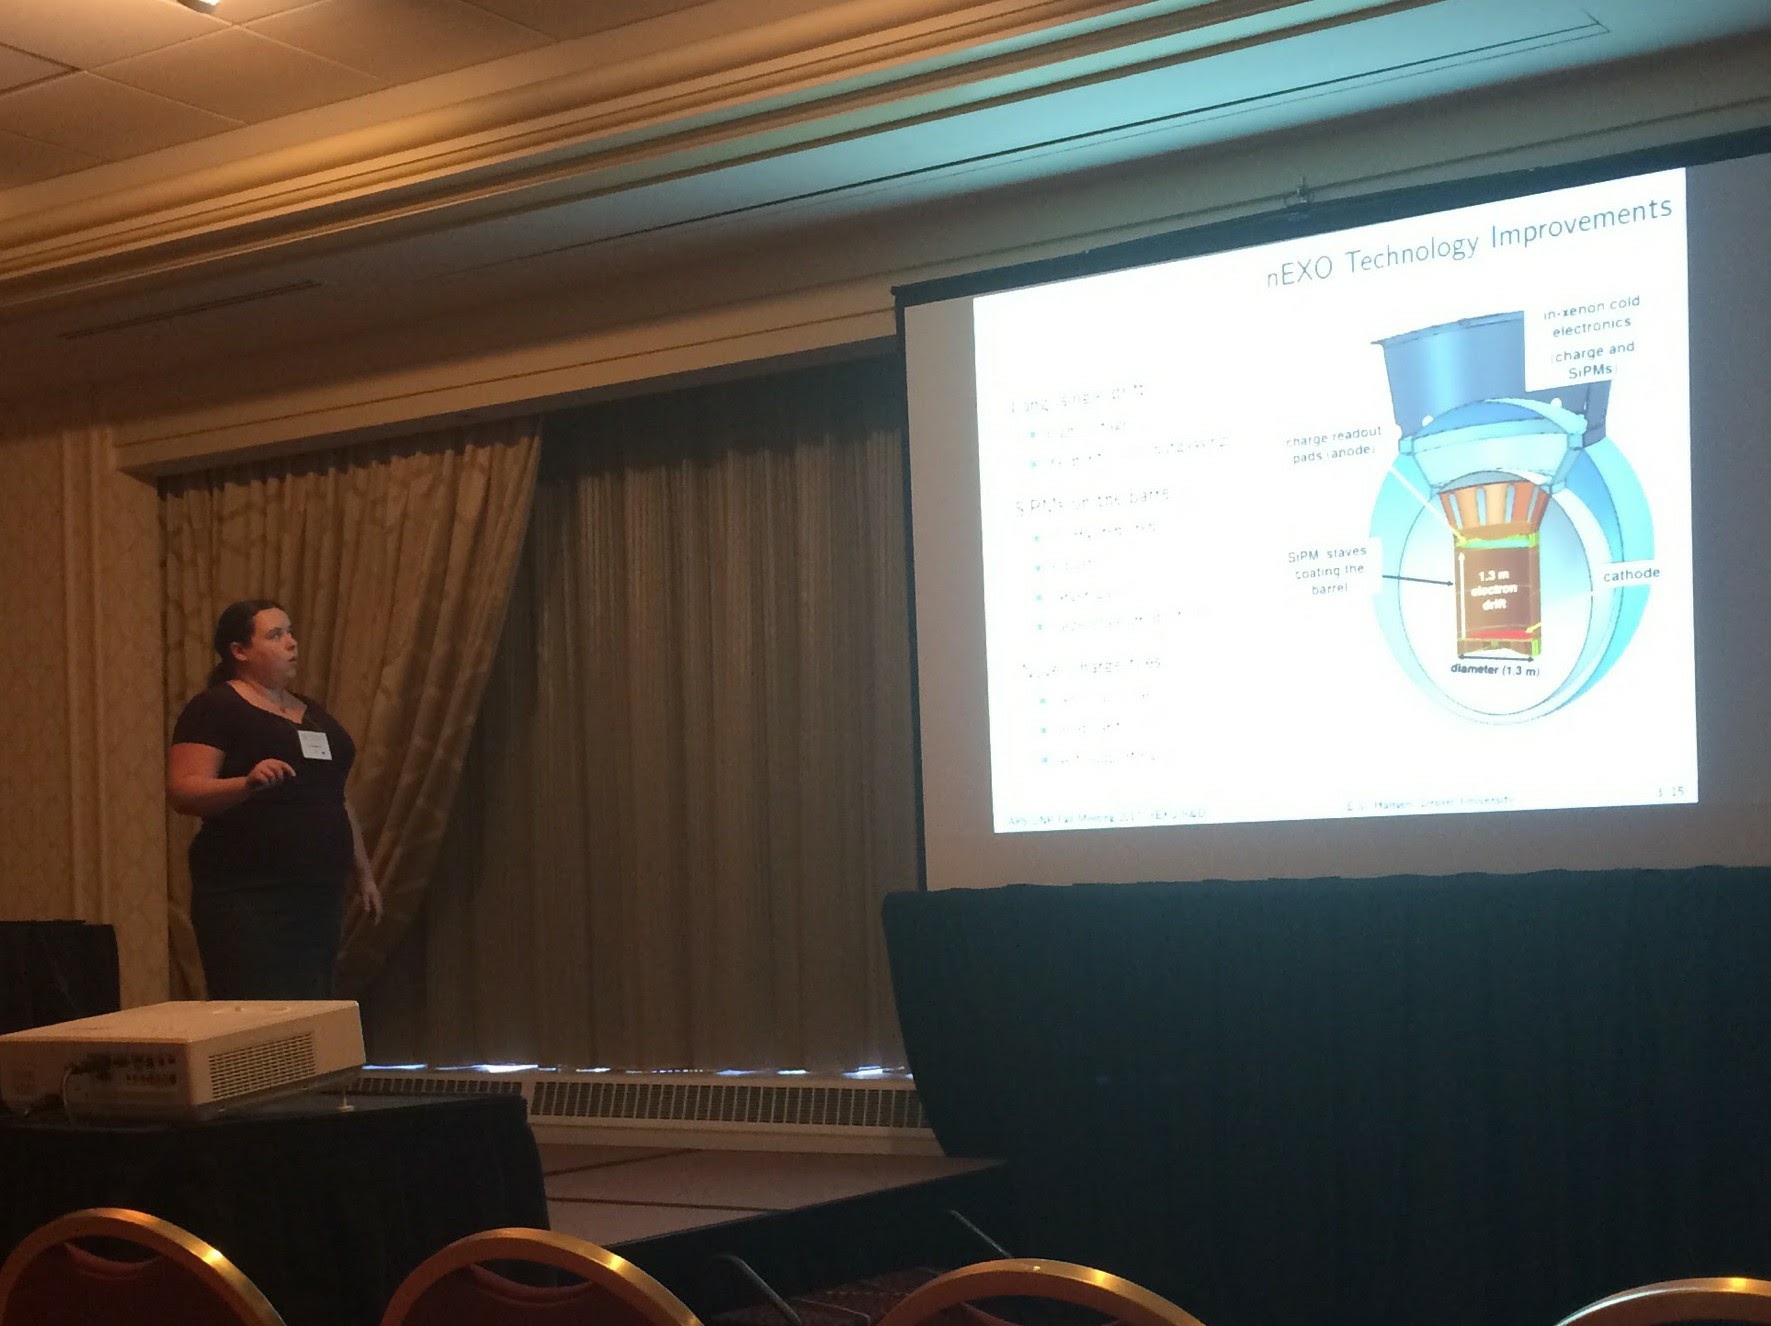 Photograph of Erin giving a talk at a conference. She stands to the left and looks towards the slides projected on a white screen on the right. She uses a laser to point out details on a slide labeled 'nEXO Technology Improvements' which is hard to read but has an image of the nEXO detector in the cryopit at SNO lab